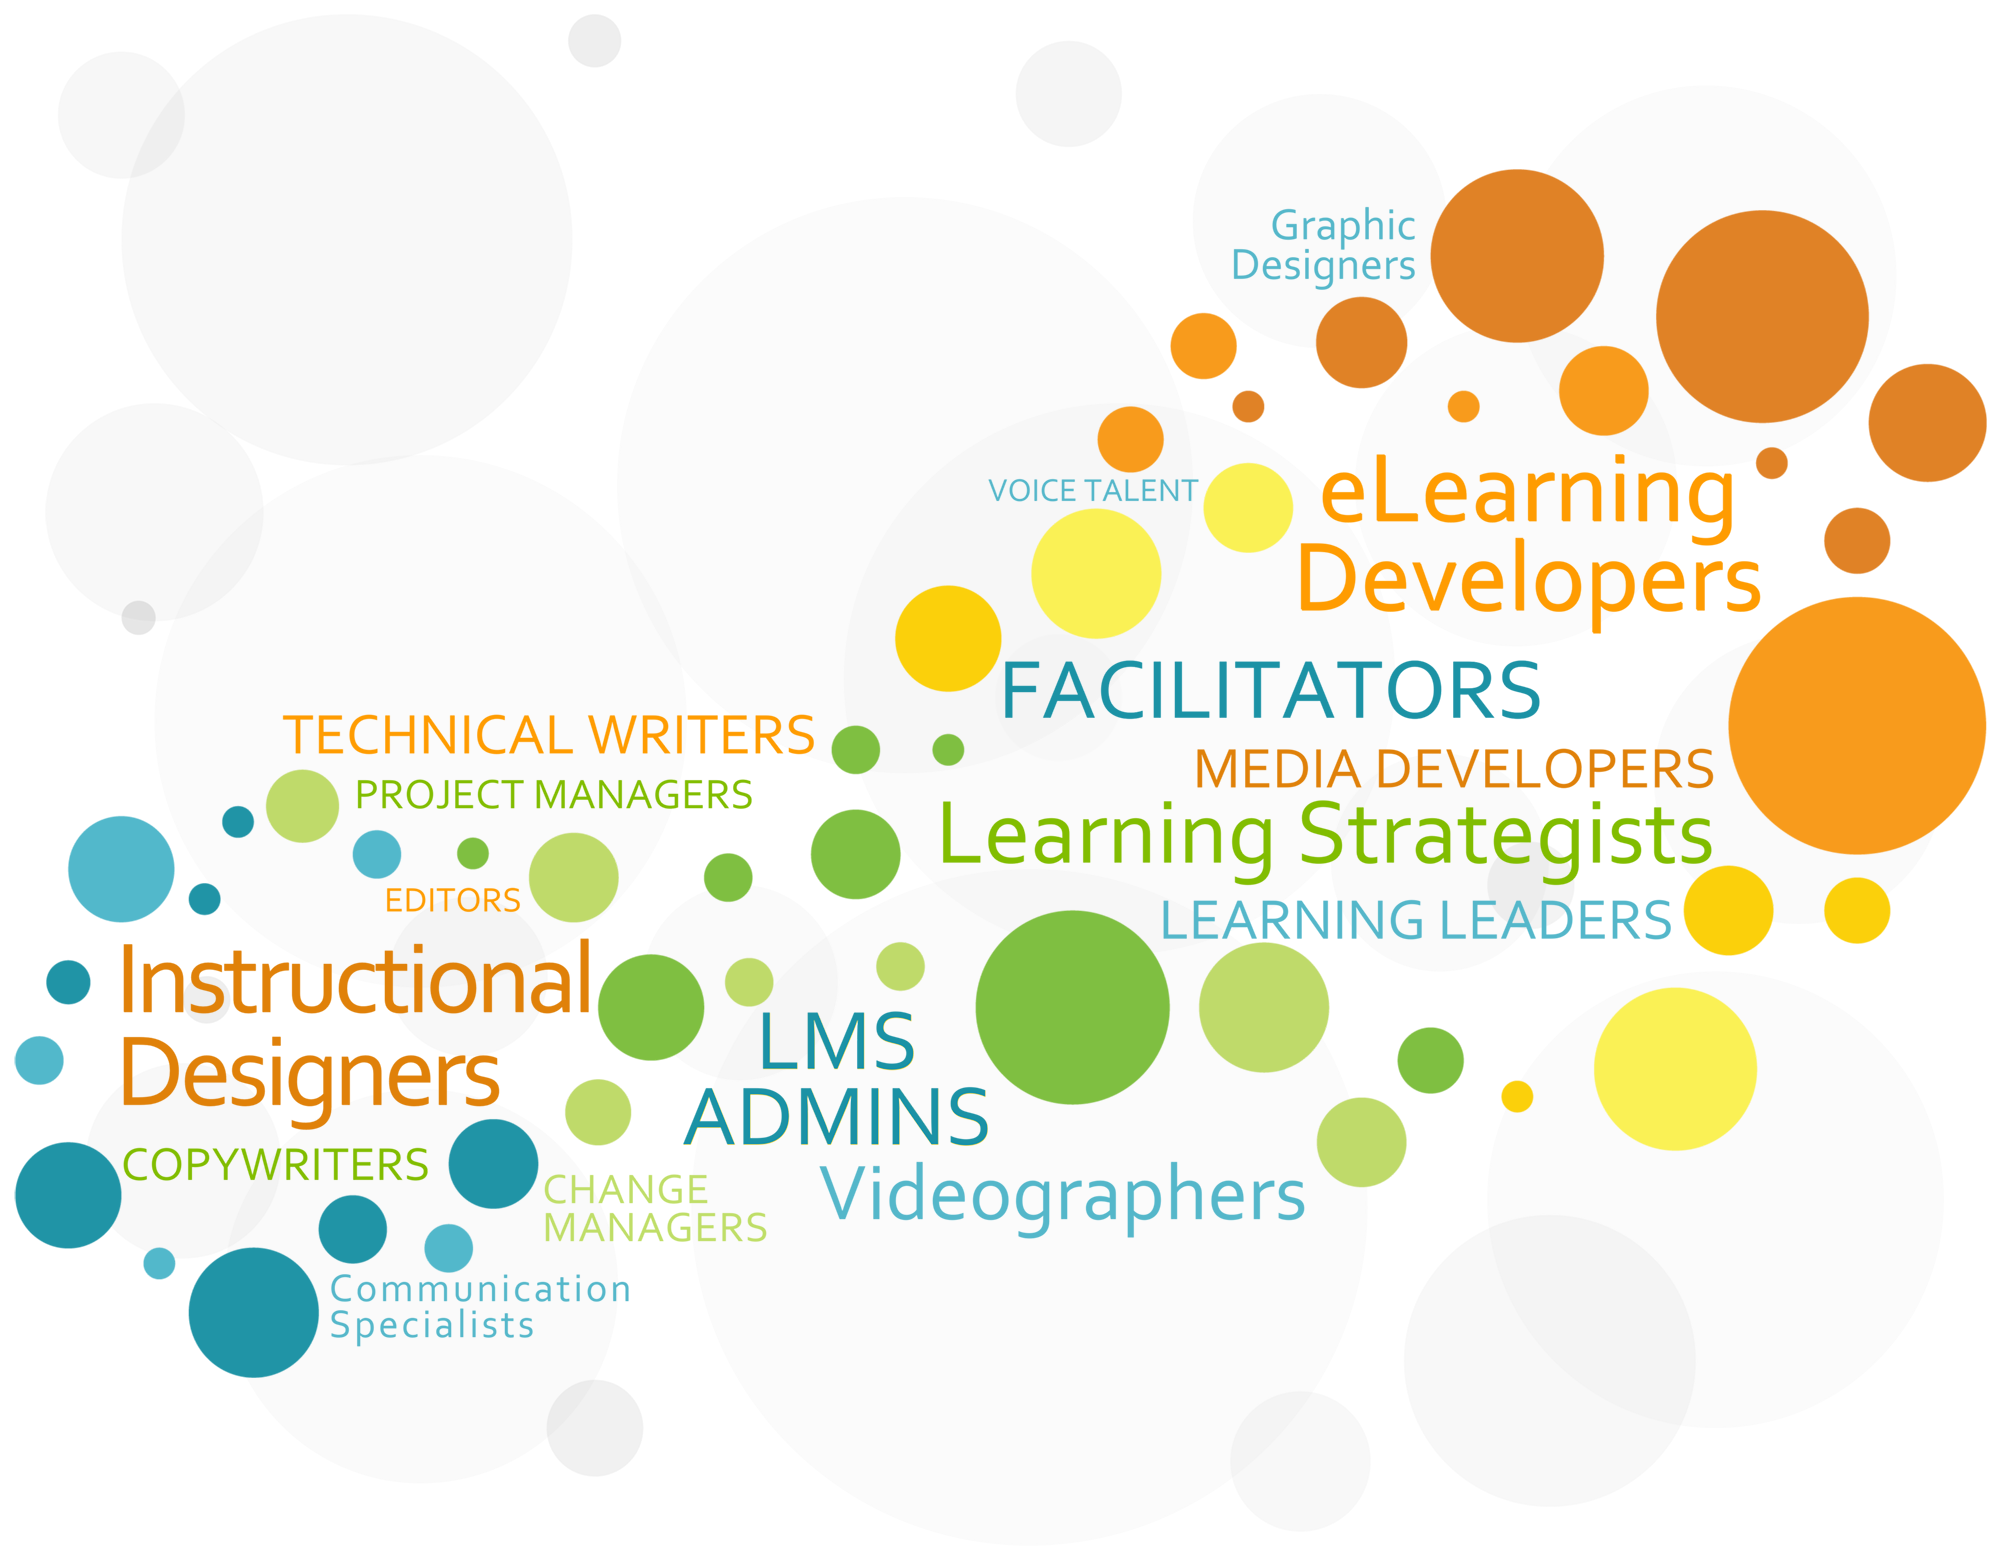 Word cloud of positions Fredrickson Learning will staff for, including: instructional designers, copywriters, communications specialists, change managers, LMS admins, videographers, editors, project managers, technical writers, learning leaders, learning strategists, media developers, facilitators, e-learning developers, voice talent, and graphic designers.